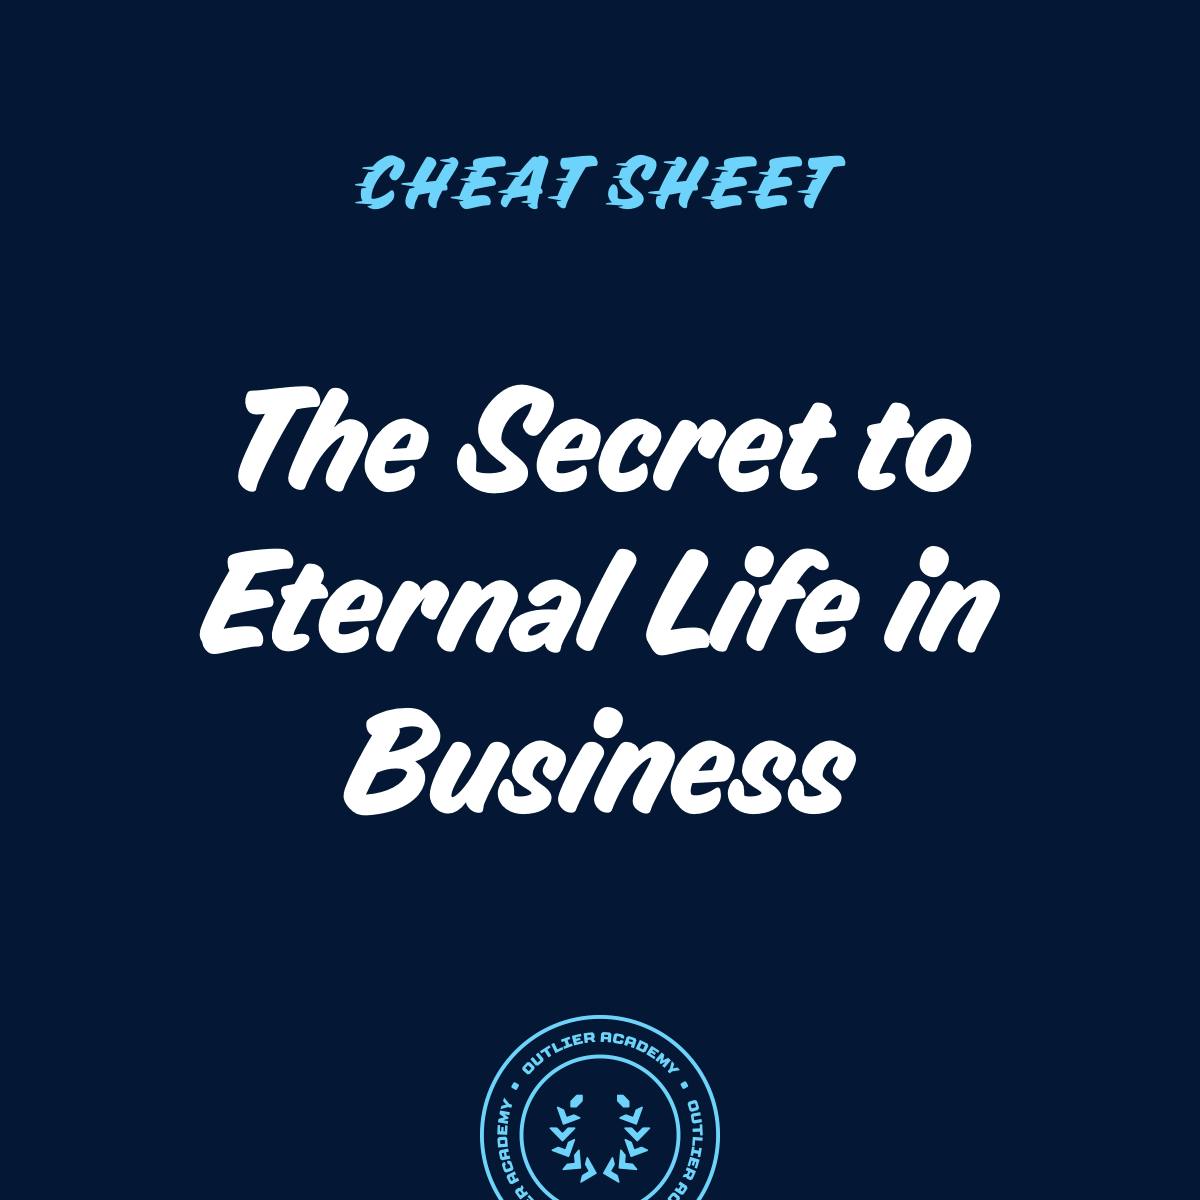 Cheat Sheet: The Secret to Eternal Life in Business